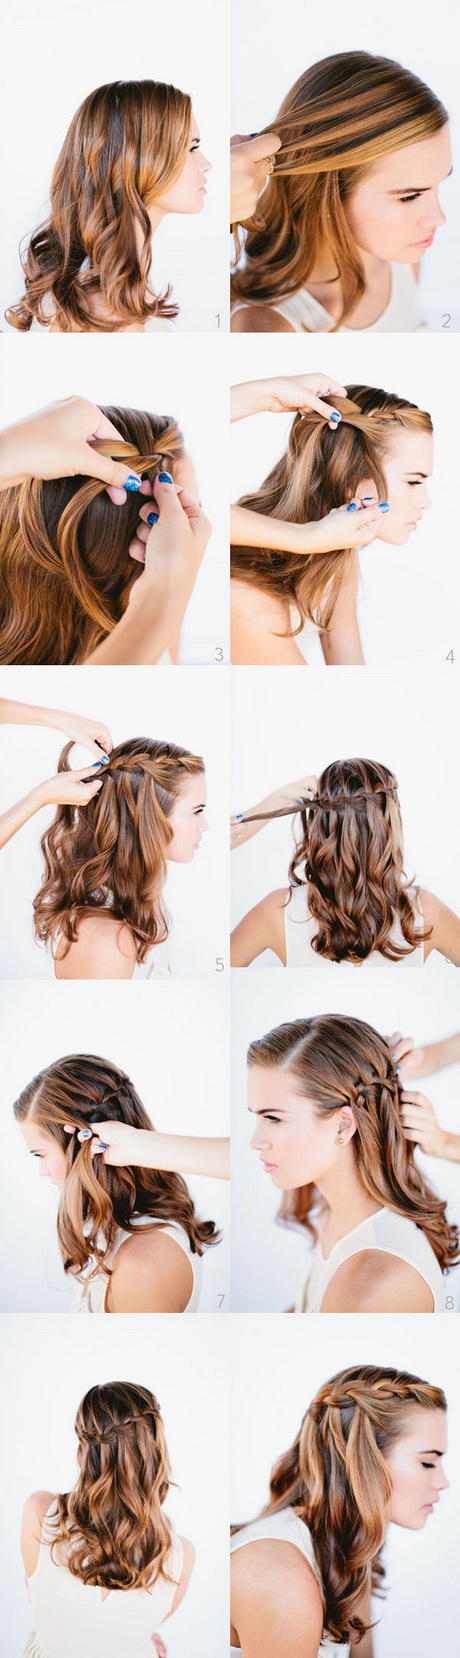 Step by step curly hairstyles